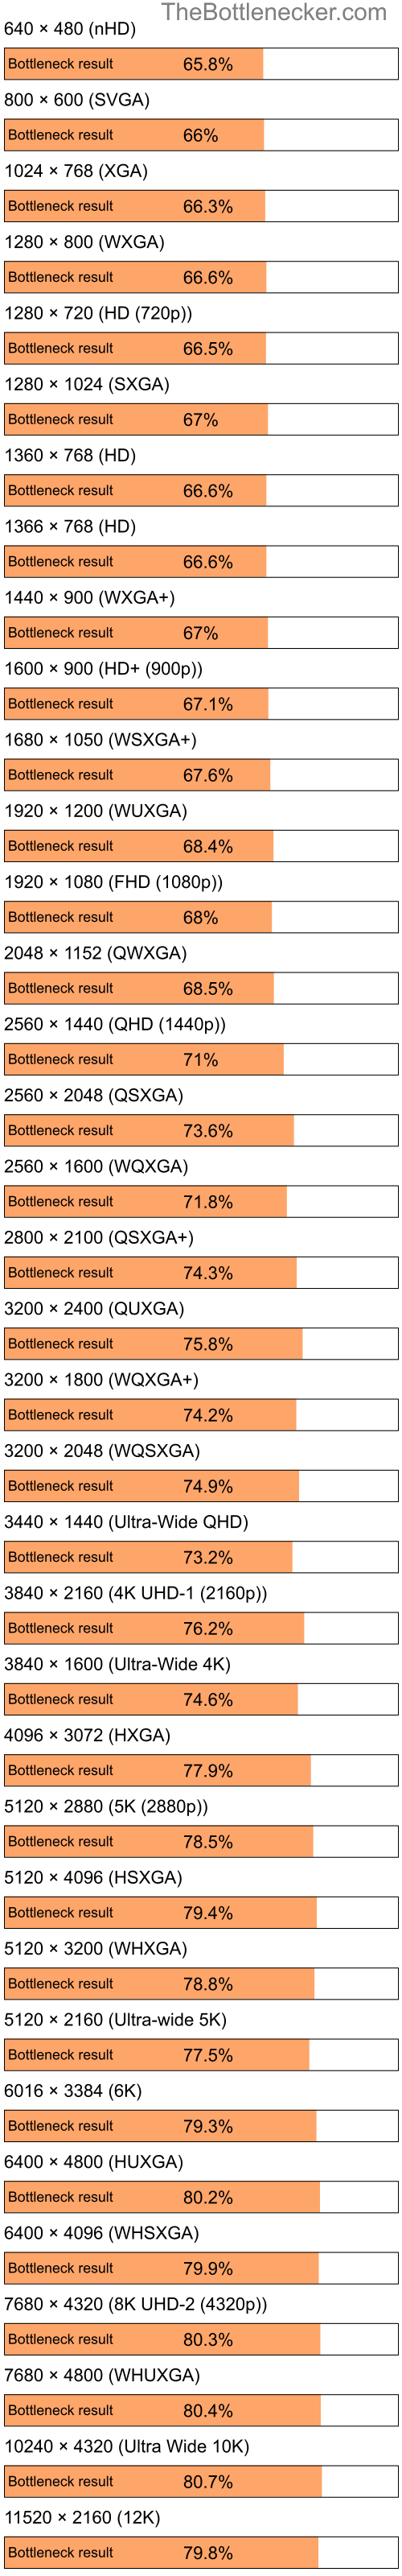 Bottleneck results by resolution for Intel Pentium 4 and NVIDIA GeForce 6610 XL in General Tasks